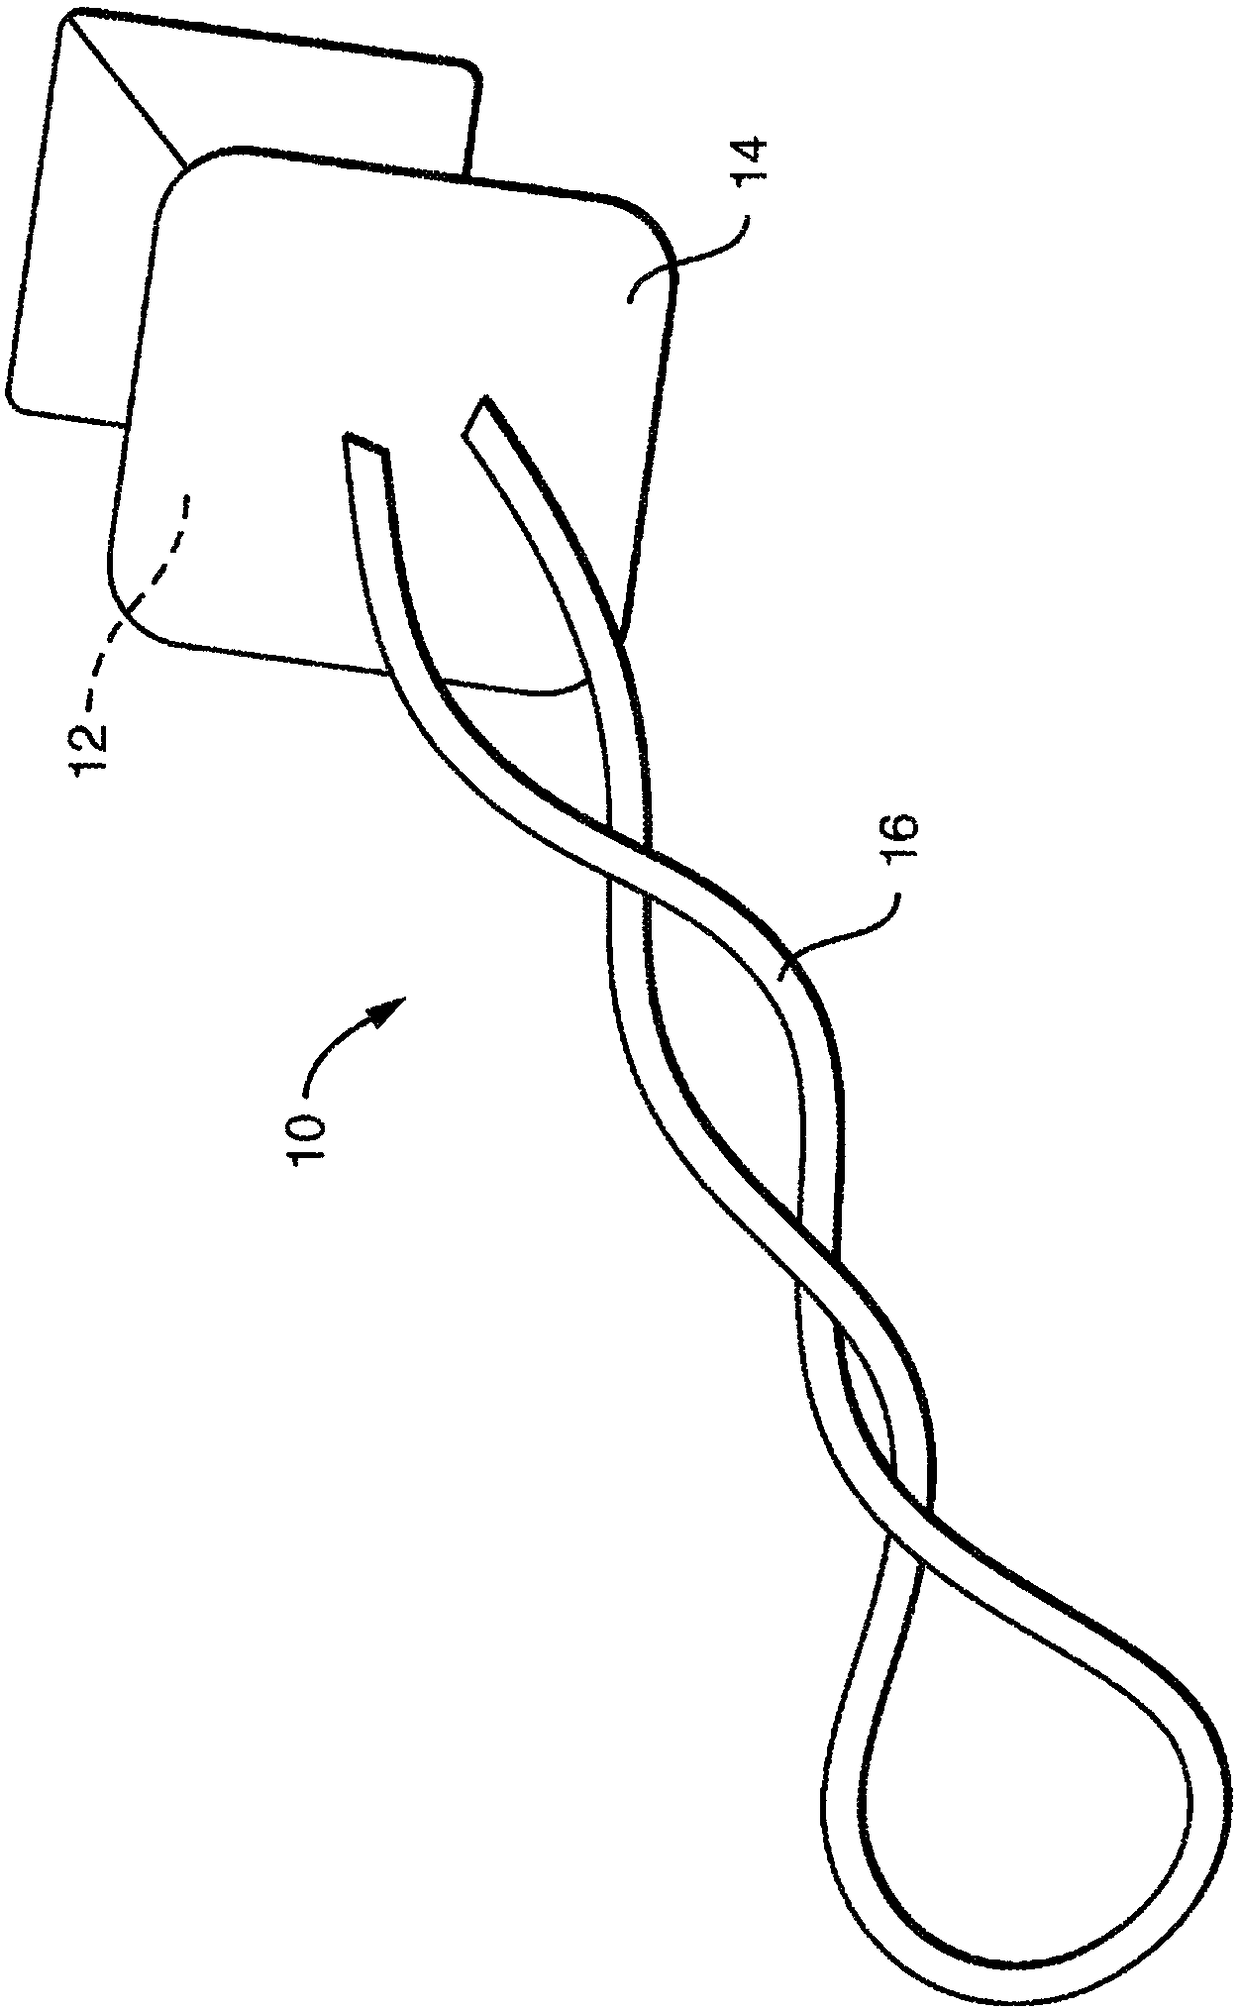 Method of manufacture of vaginal insert